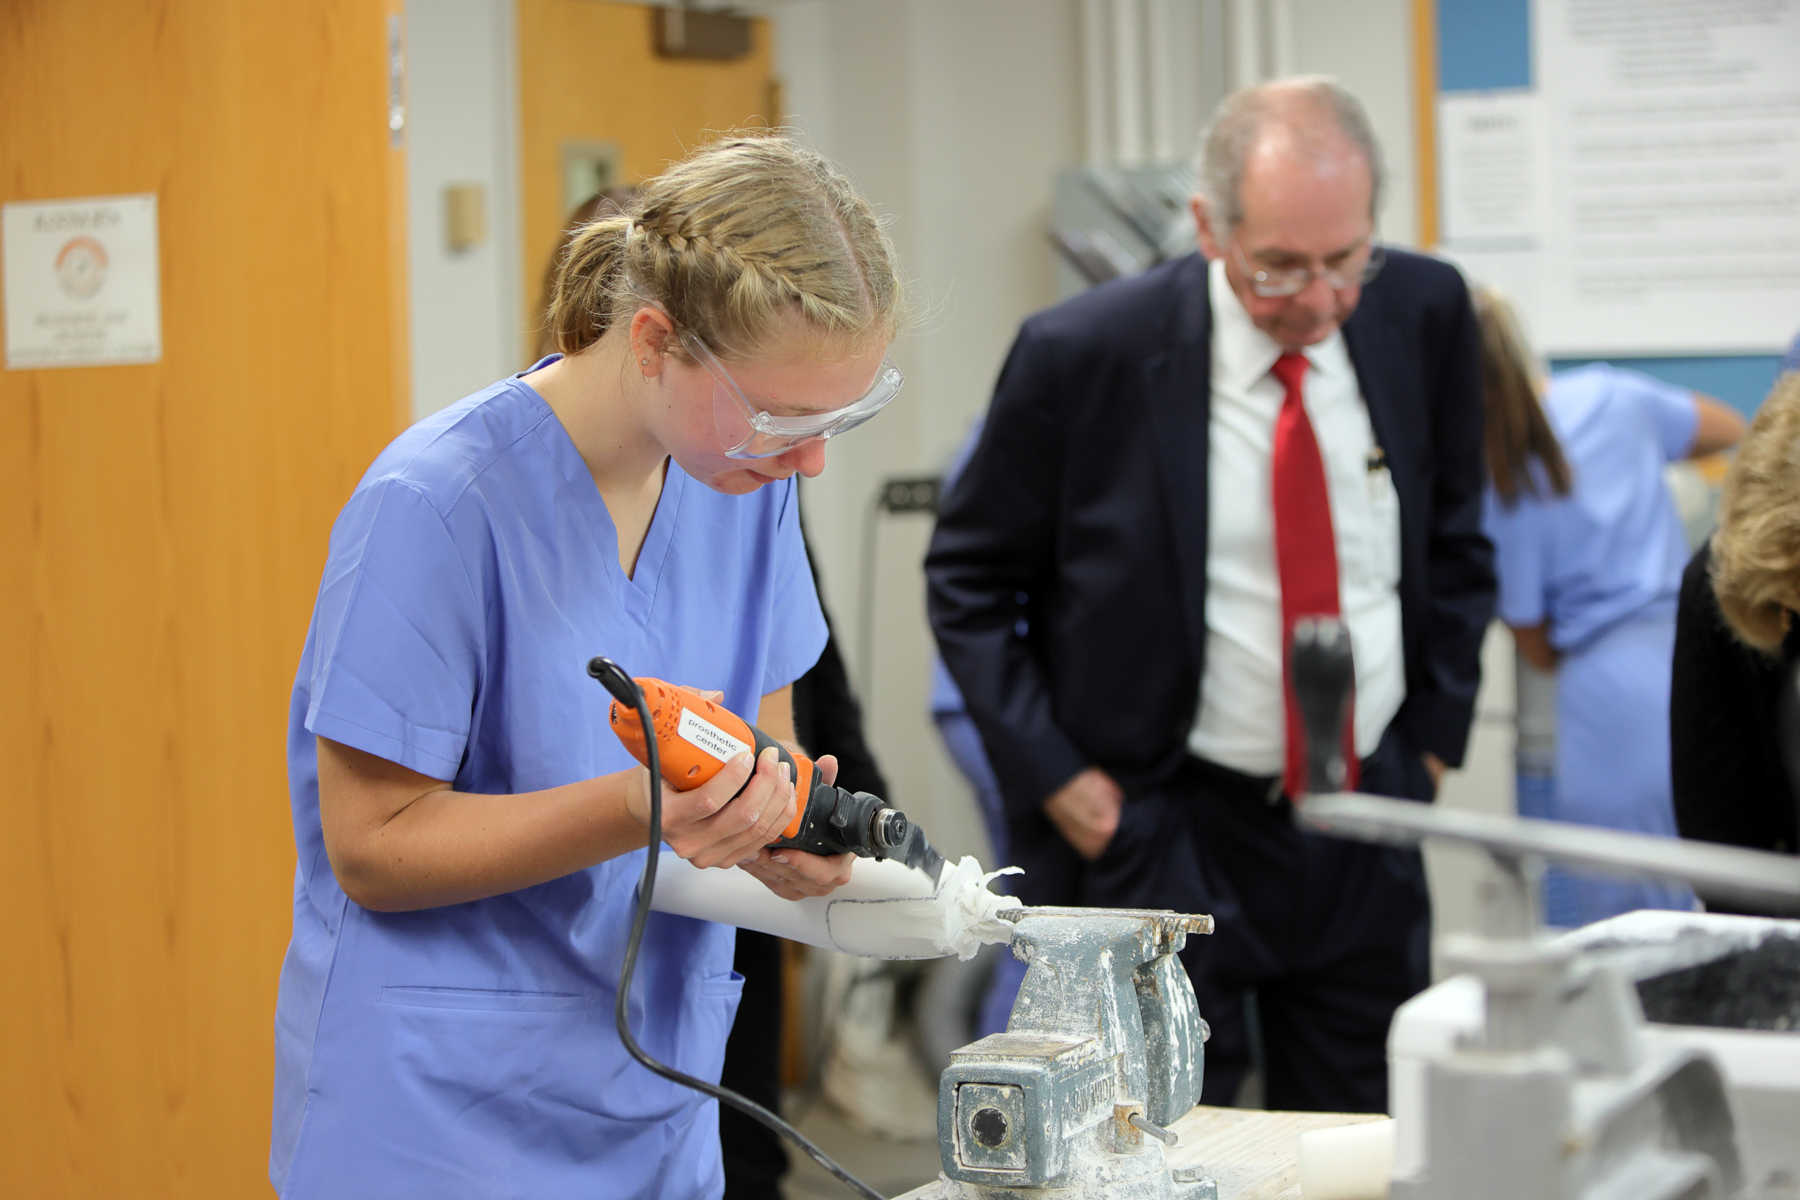 A woman in scrubs uses a tool on a prosthetic limb